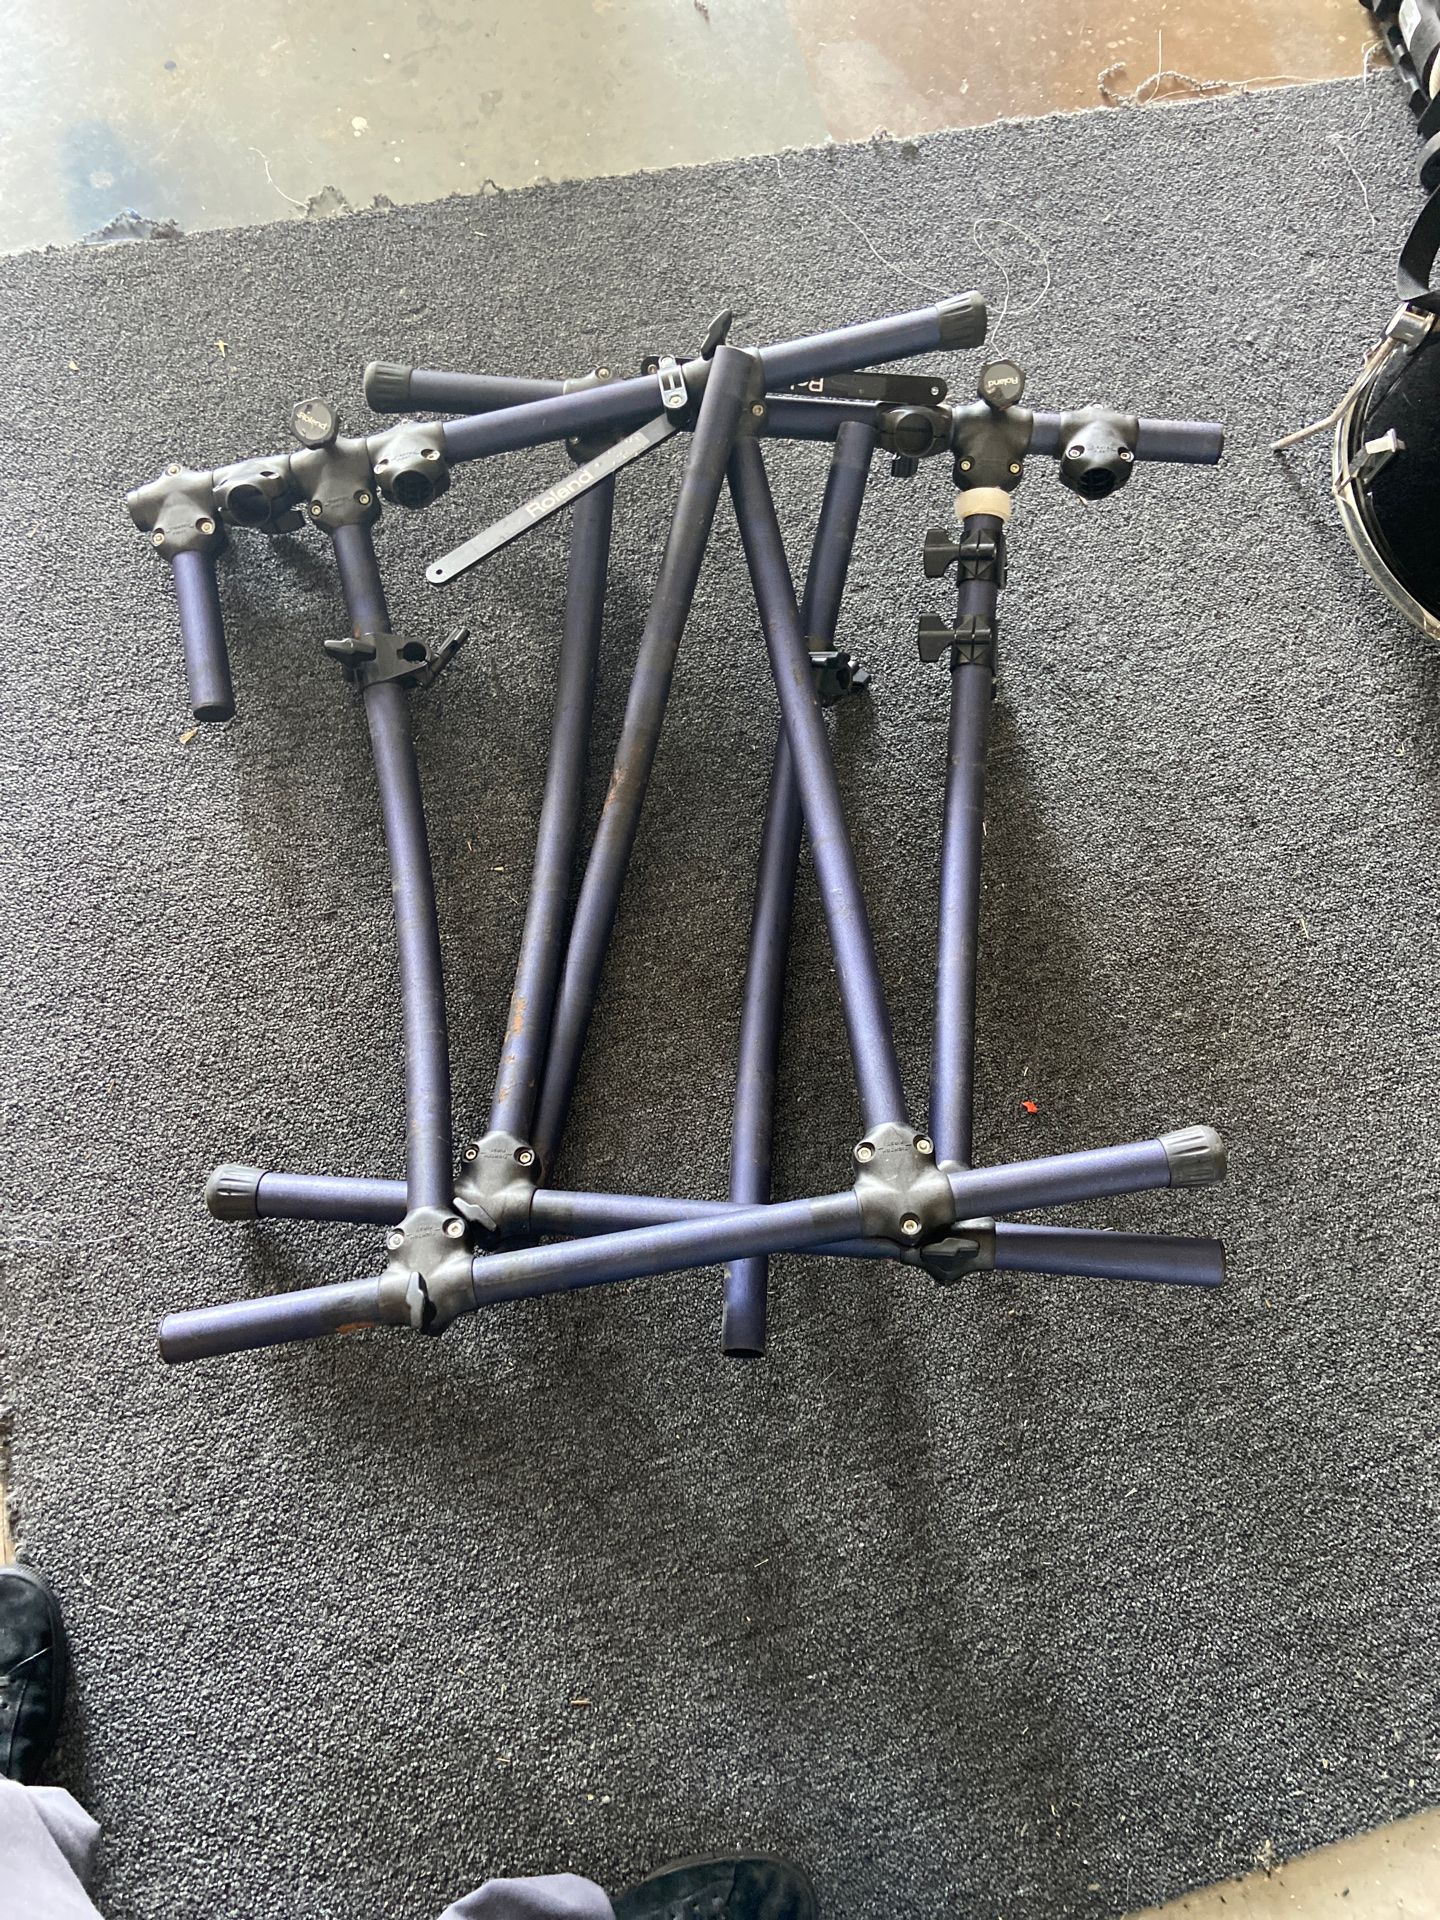 Drum Roland Cage with 4 pad mounts mds10